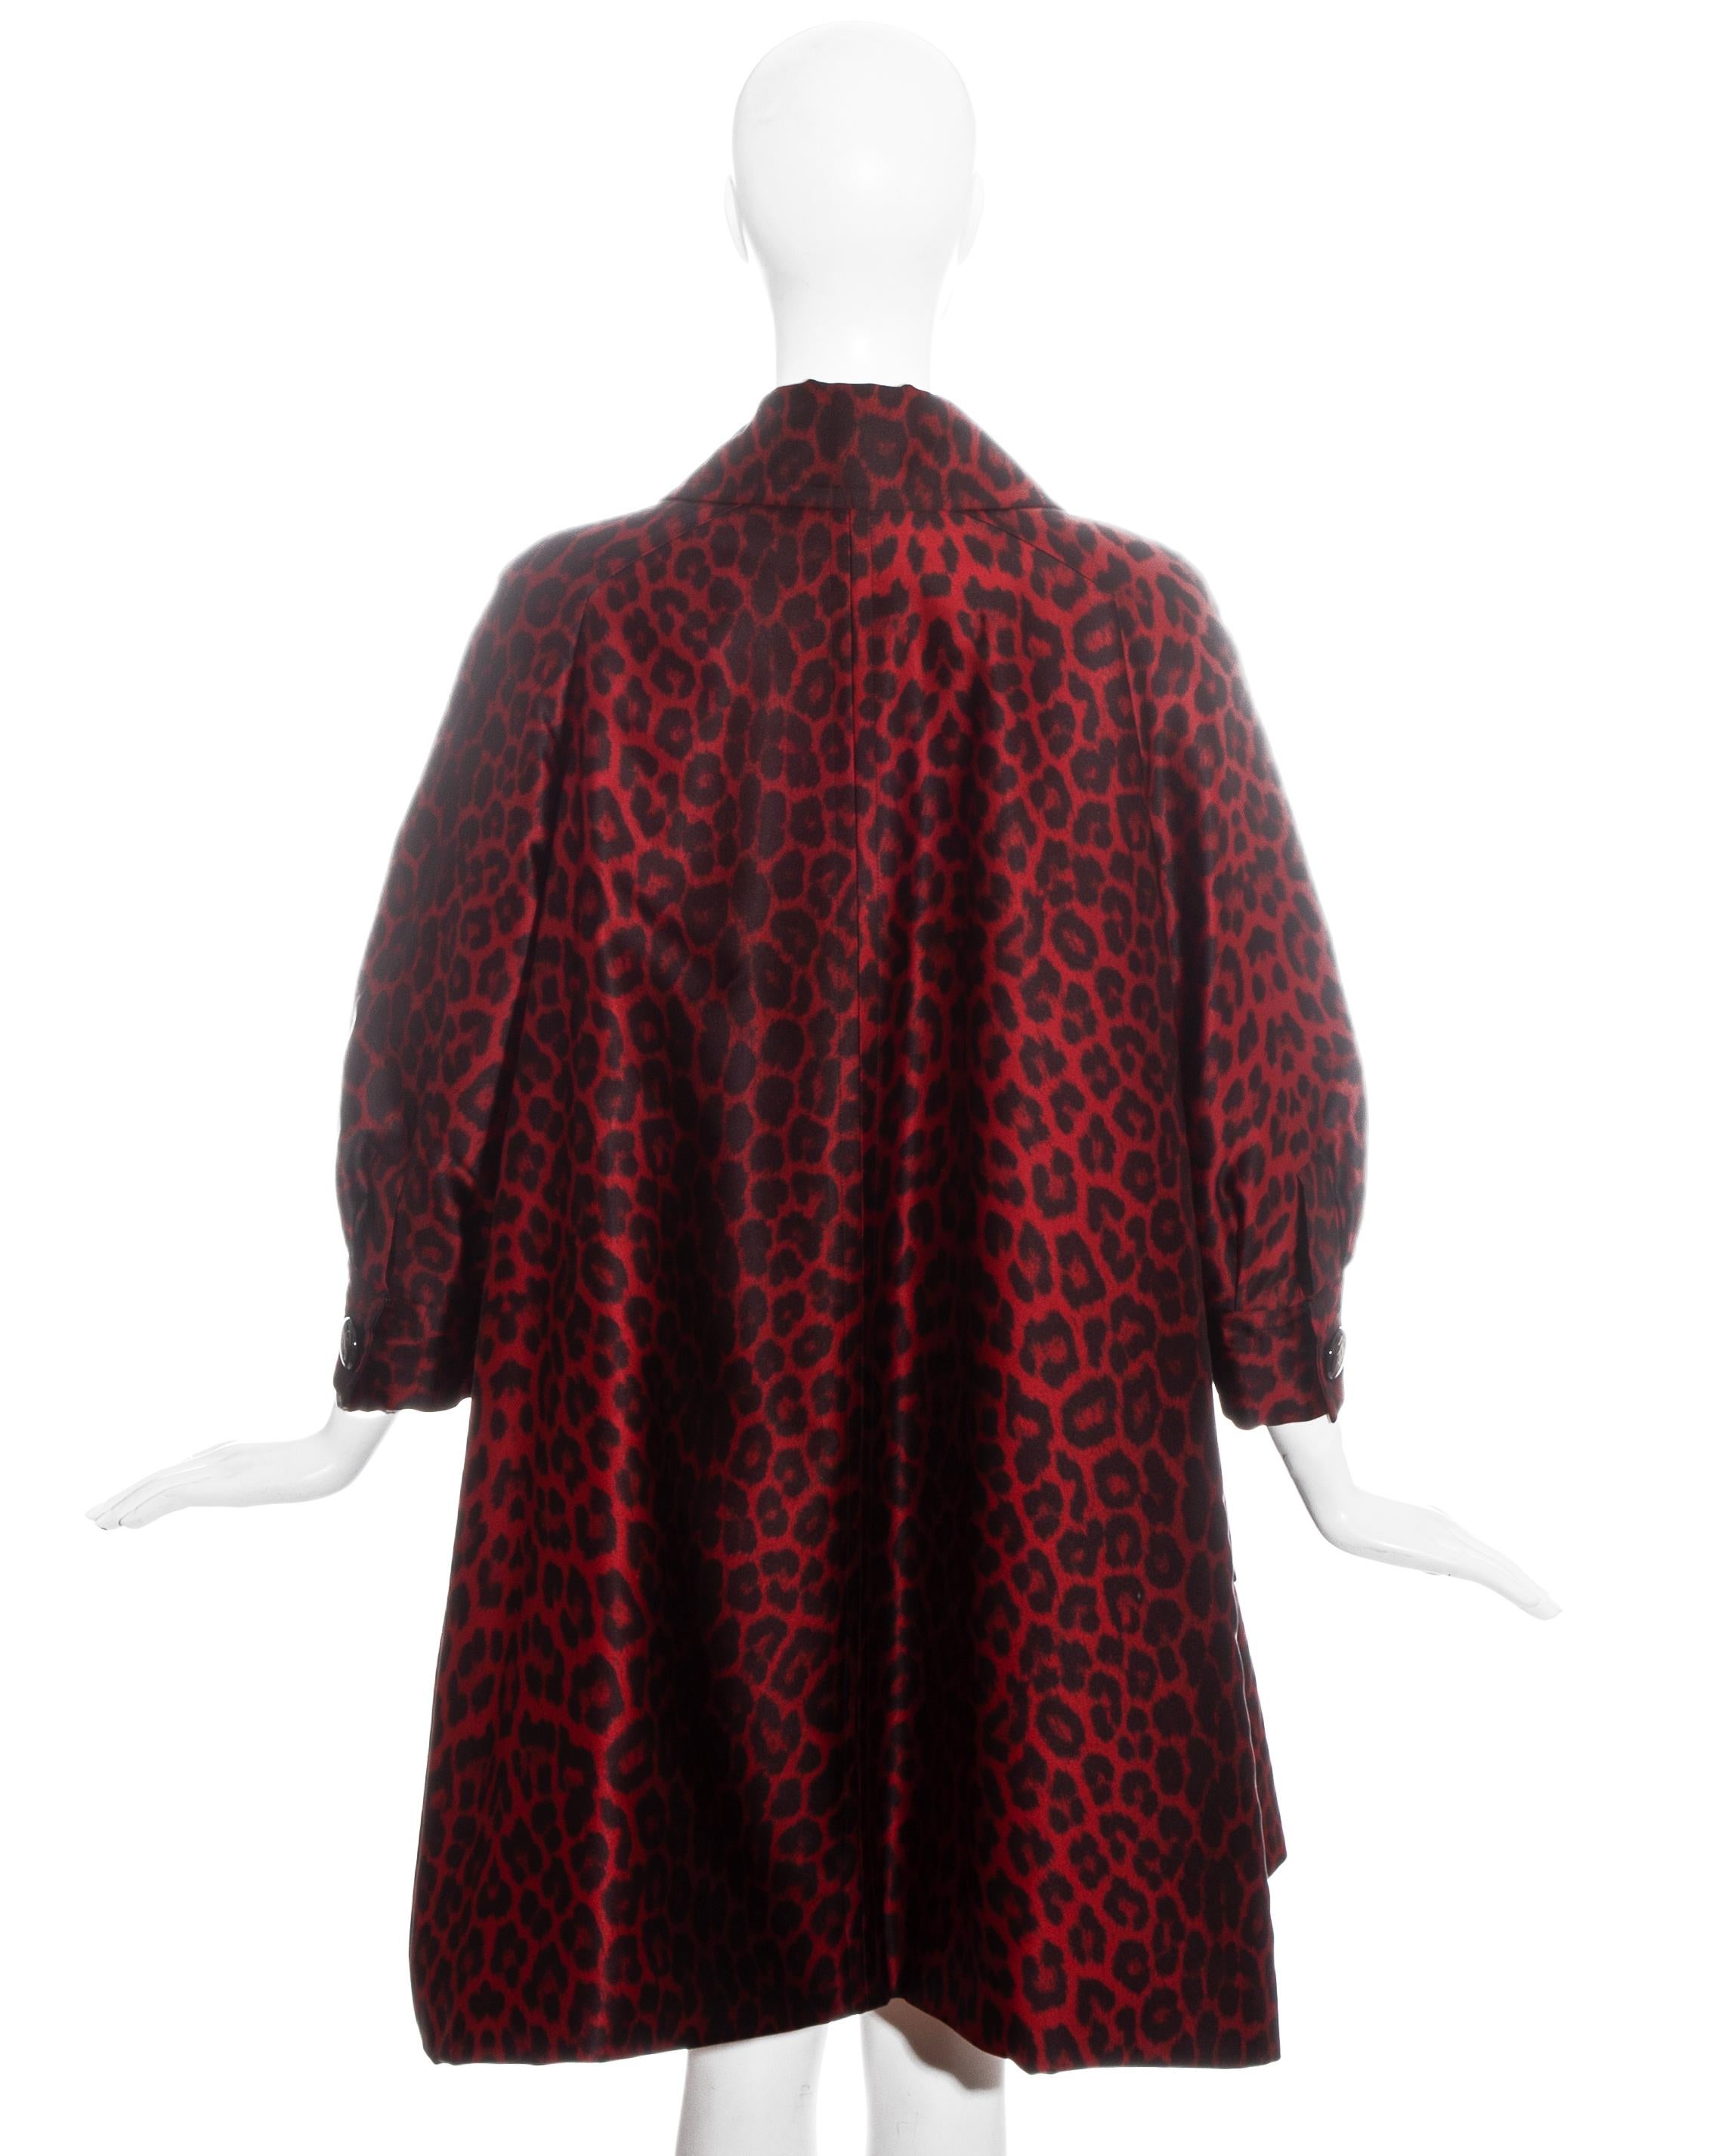 Jacques Fath red leopard print silk evening coat, fw 1992 In Excellent Condition For Sale In London, GB